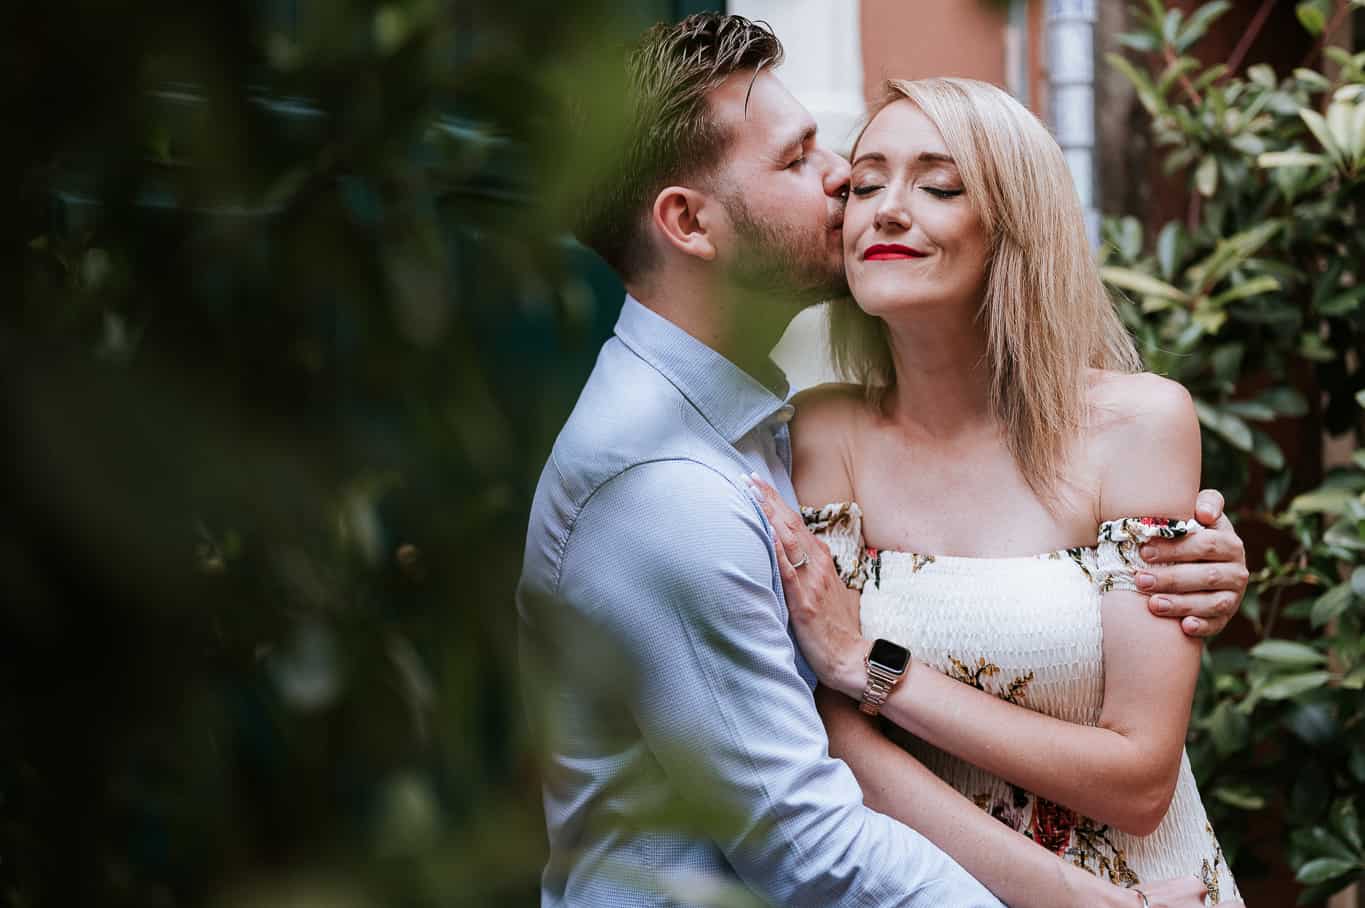 Couple snuggling during engagement photo shoot in front of Bushes on the streets of trastever in Rome Italy